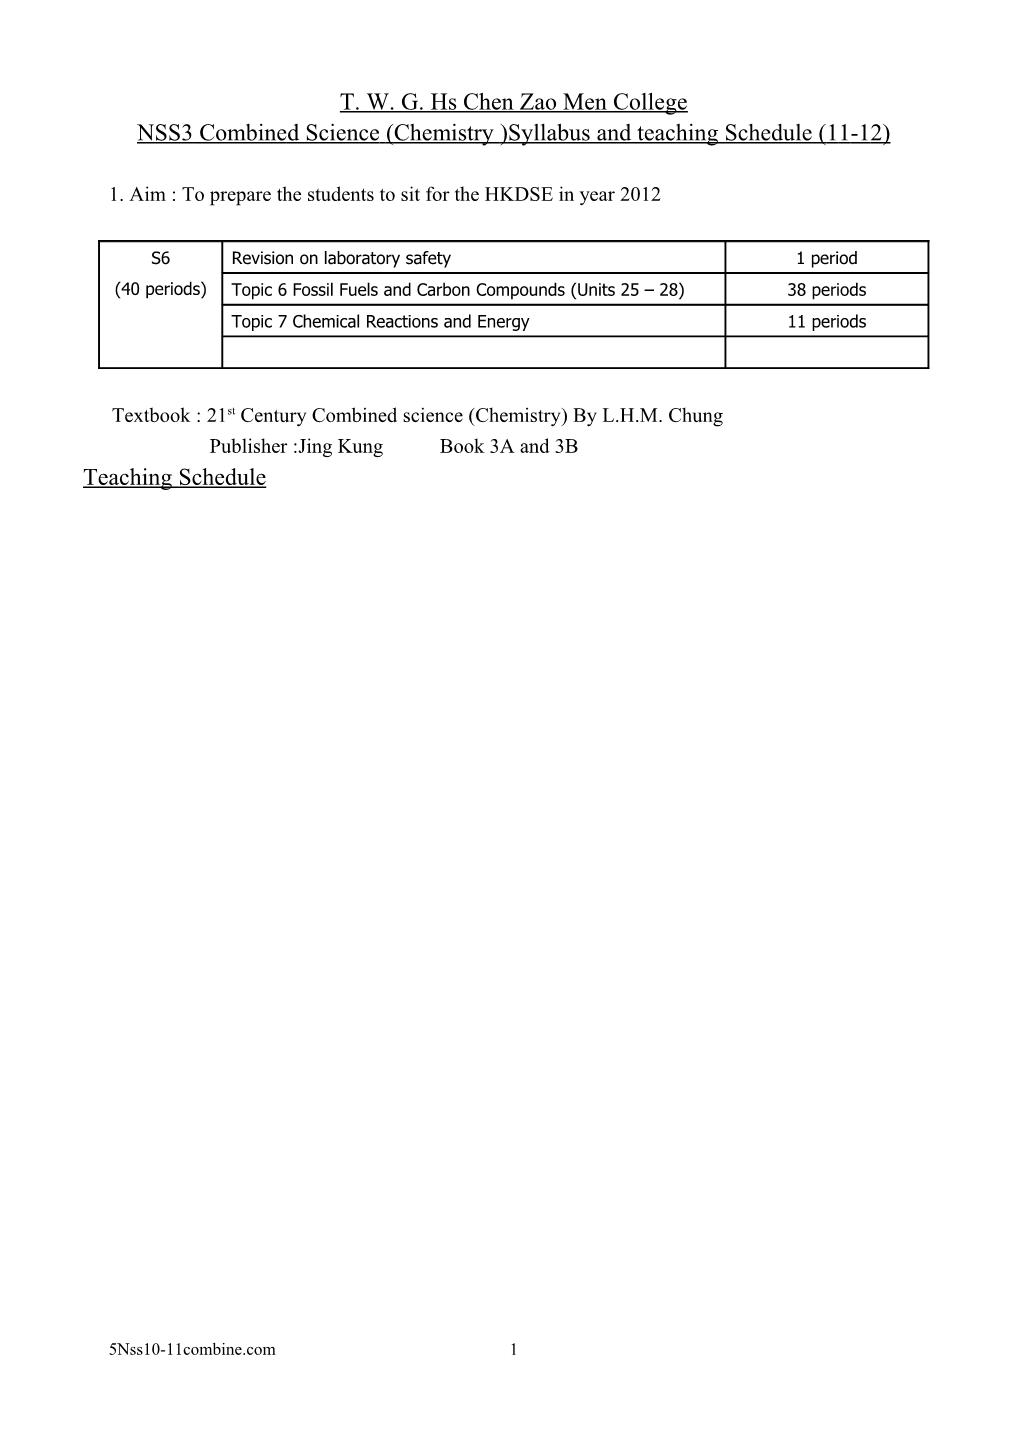 NSS3 Combined Science(Chemistry )Syllabus and Teaching Schedule (11-12)